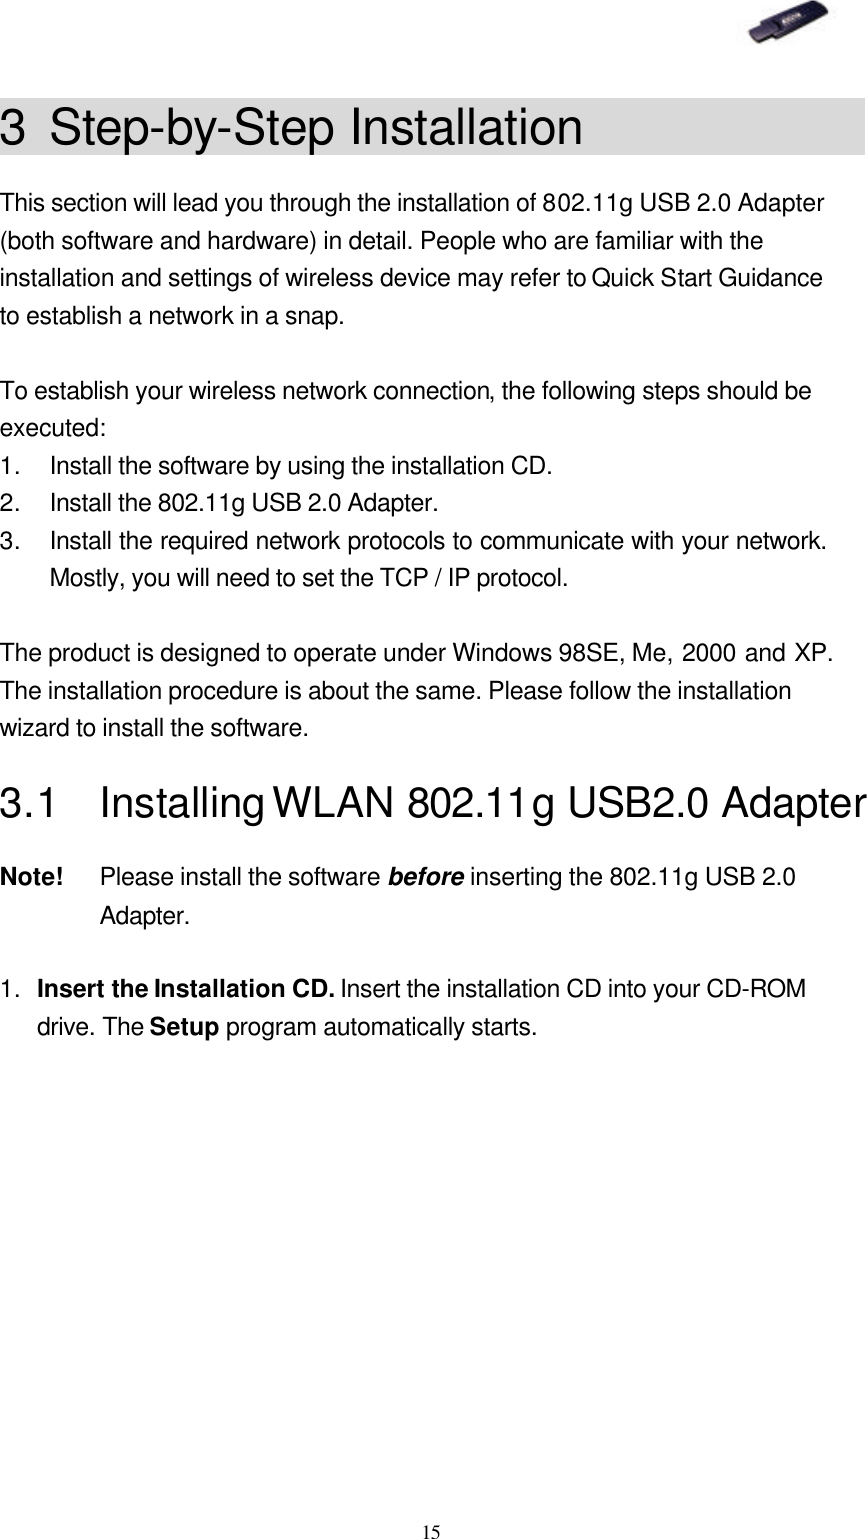   15 3 Step-by-Step Installation             This section will lead you through the installation of 802.11g USB 2.0 Adapter (both software and hardware) in detail. People who are familiar with the installation and settings of wireless device may refer to Quick Start Guidance to establish a network in a snap.    To establish your wireless network connection, the following steps should be executed: 1. Install the software by using the installation CD. 2. Install the 802.11g USB 2.0 Adapter. 3. Install the required network protocols to communicate with your network.  Mostly, you will need to set the TCP / IP protocol.  The product is designed to operate under Windows 98SE, Me, 2000 and XP.  The installation procedure is about the same. Please follow the installation wizard to install the software. 3.1 Installing WLAN 802.11g USB2.0 Adapter Note! Please install the software before inserting the 802.11g USB 2.0 Adapter.  1. Insert the Installation CD. Insert the installation CD into your CD-ROM drive. The Setup program automatically starts. 